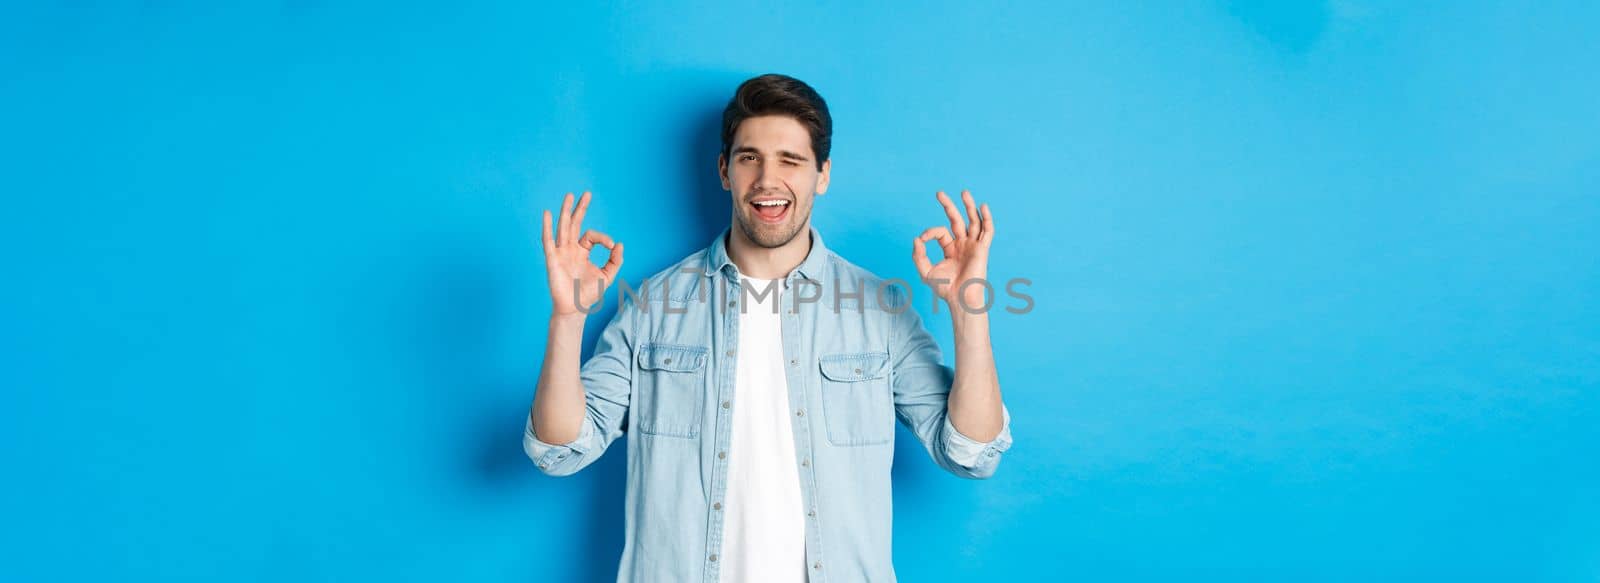 Relaxed and confident man showing ok signs and winking, everything okay gesture, standing against blue background.